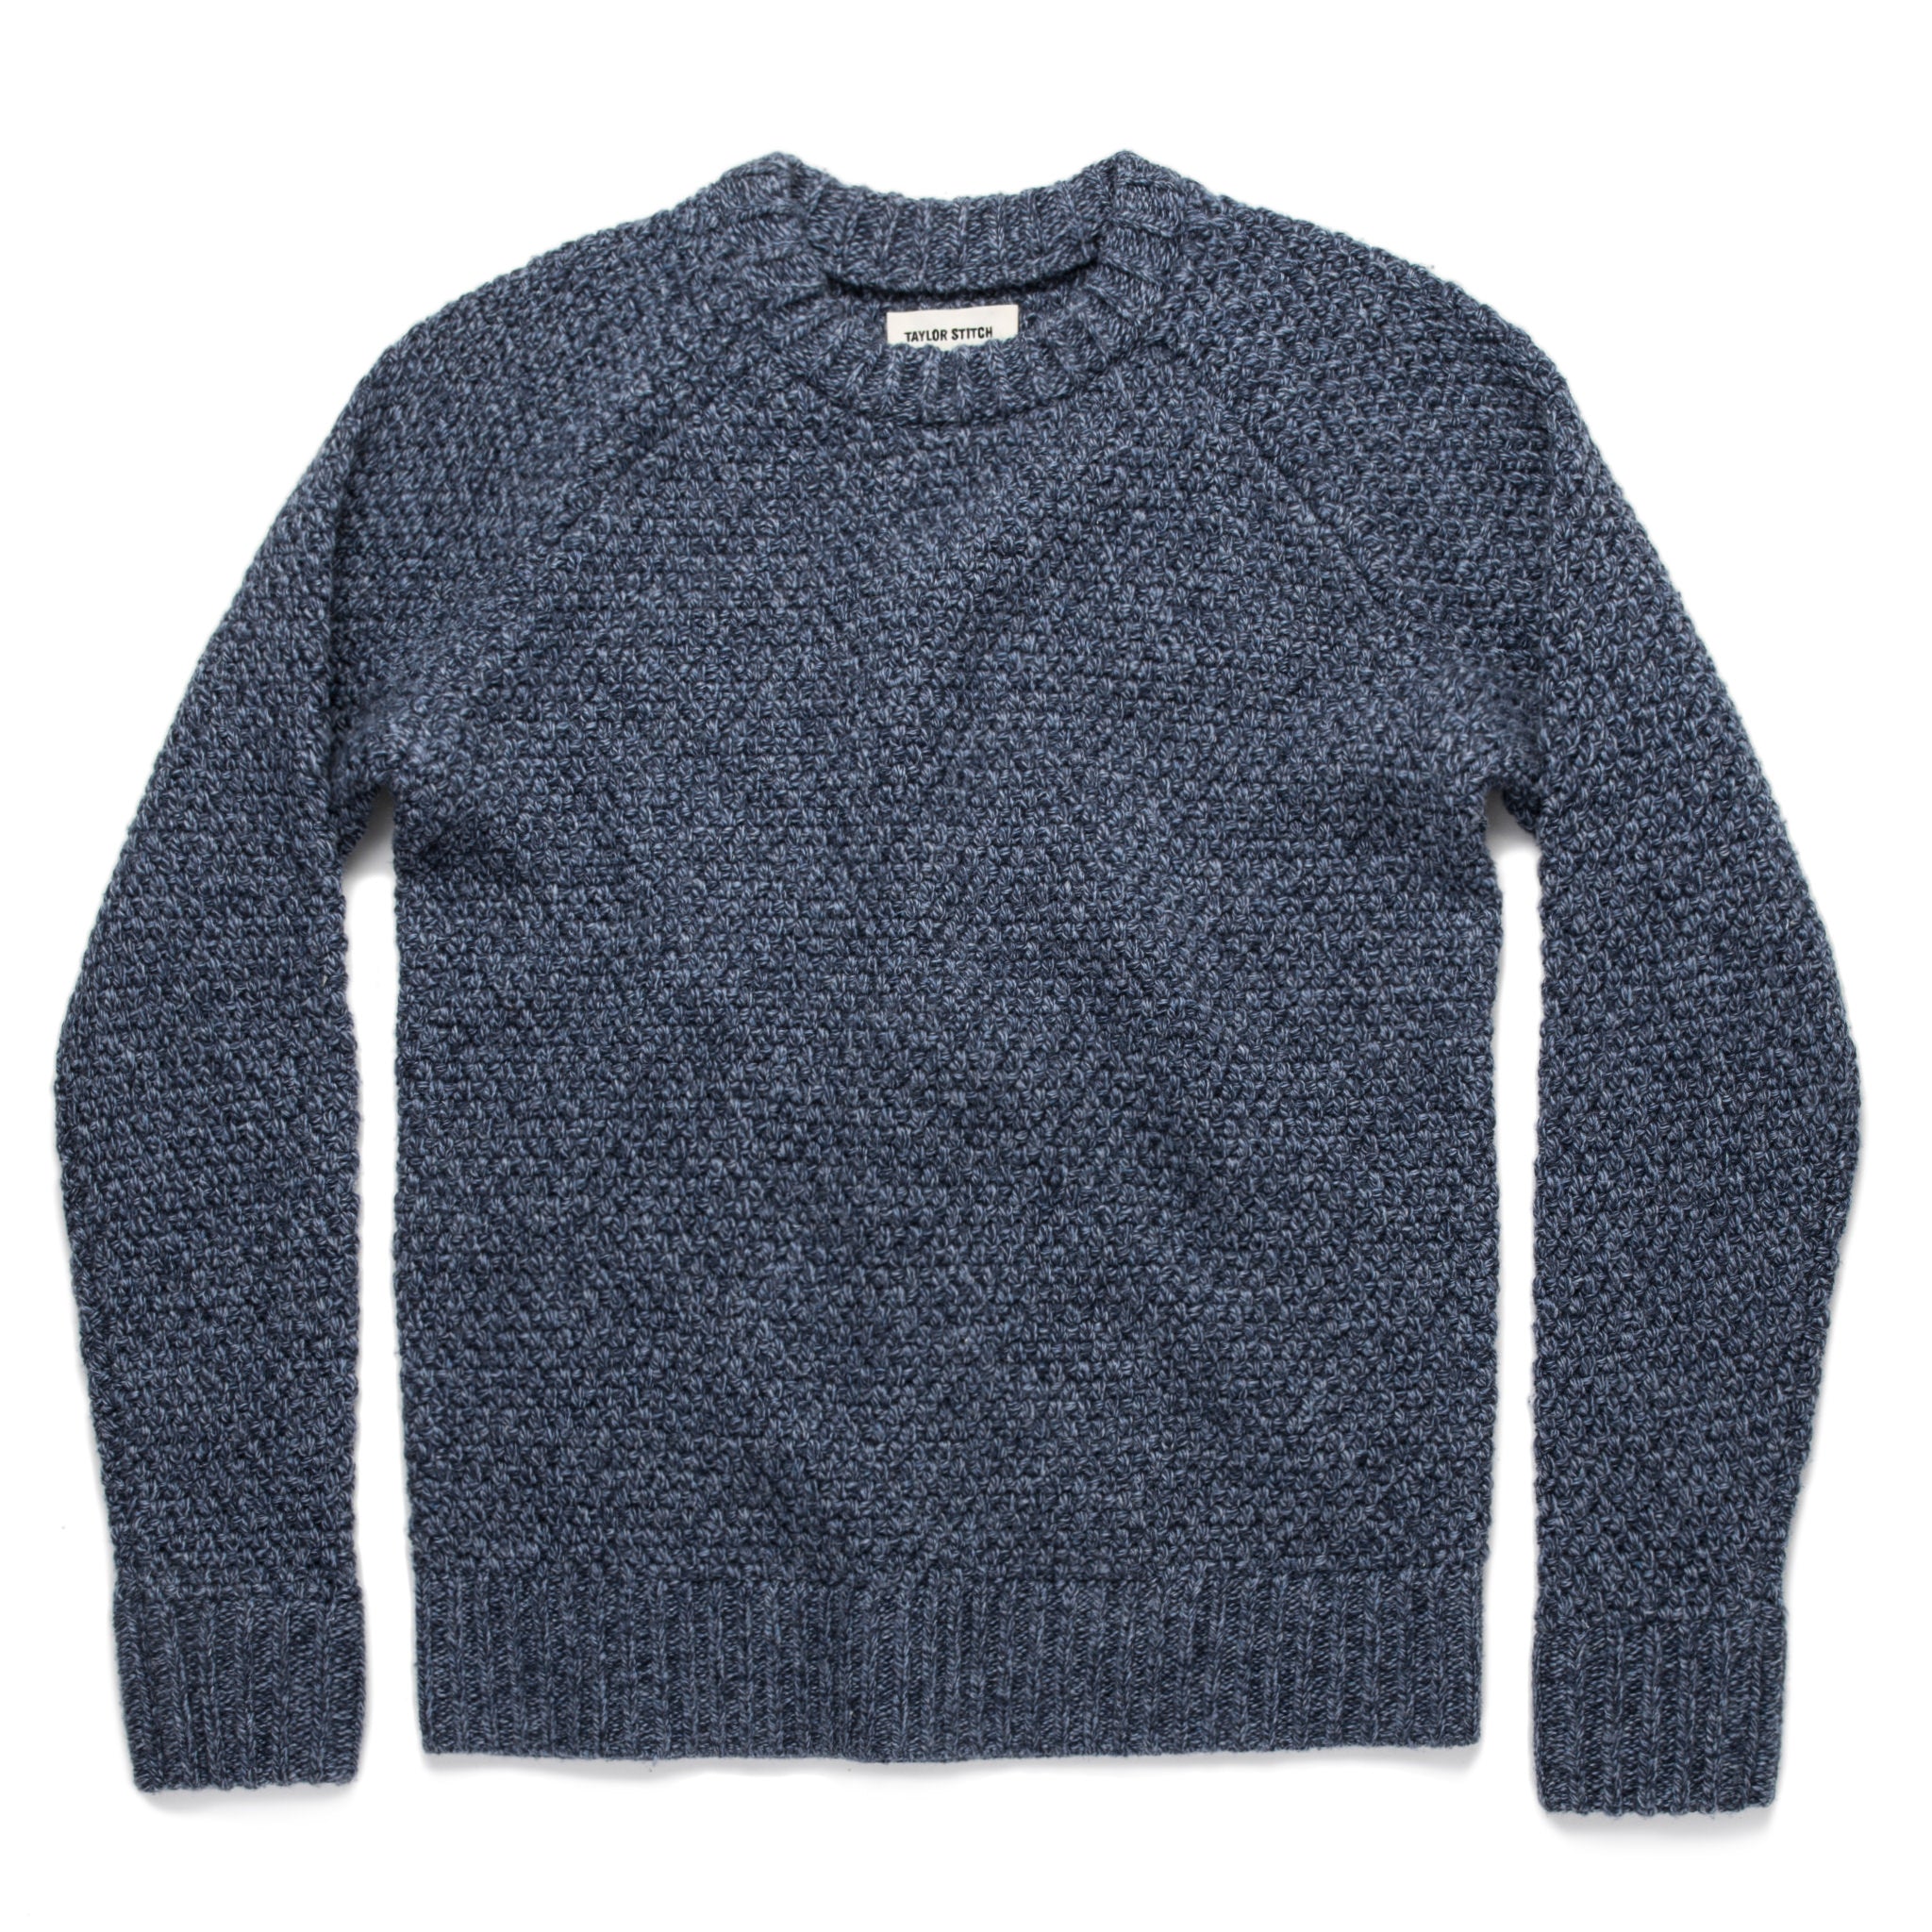 The Fisherman Sweater in Navy Melange | Taylor Stitch…